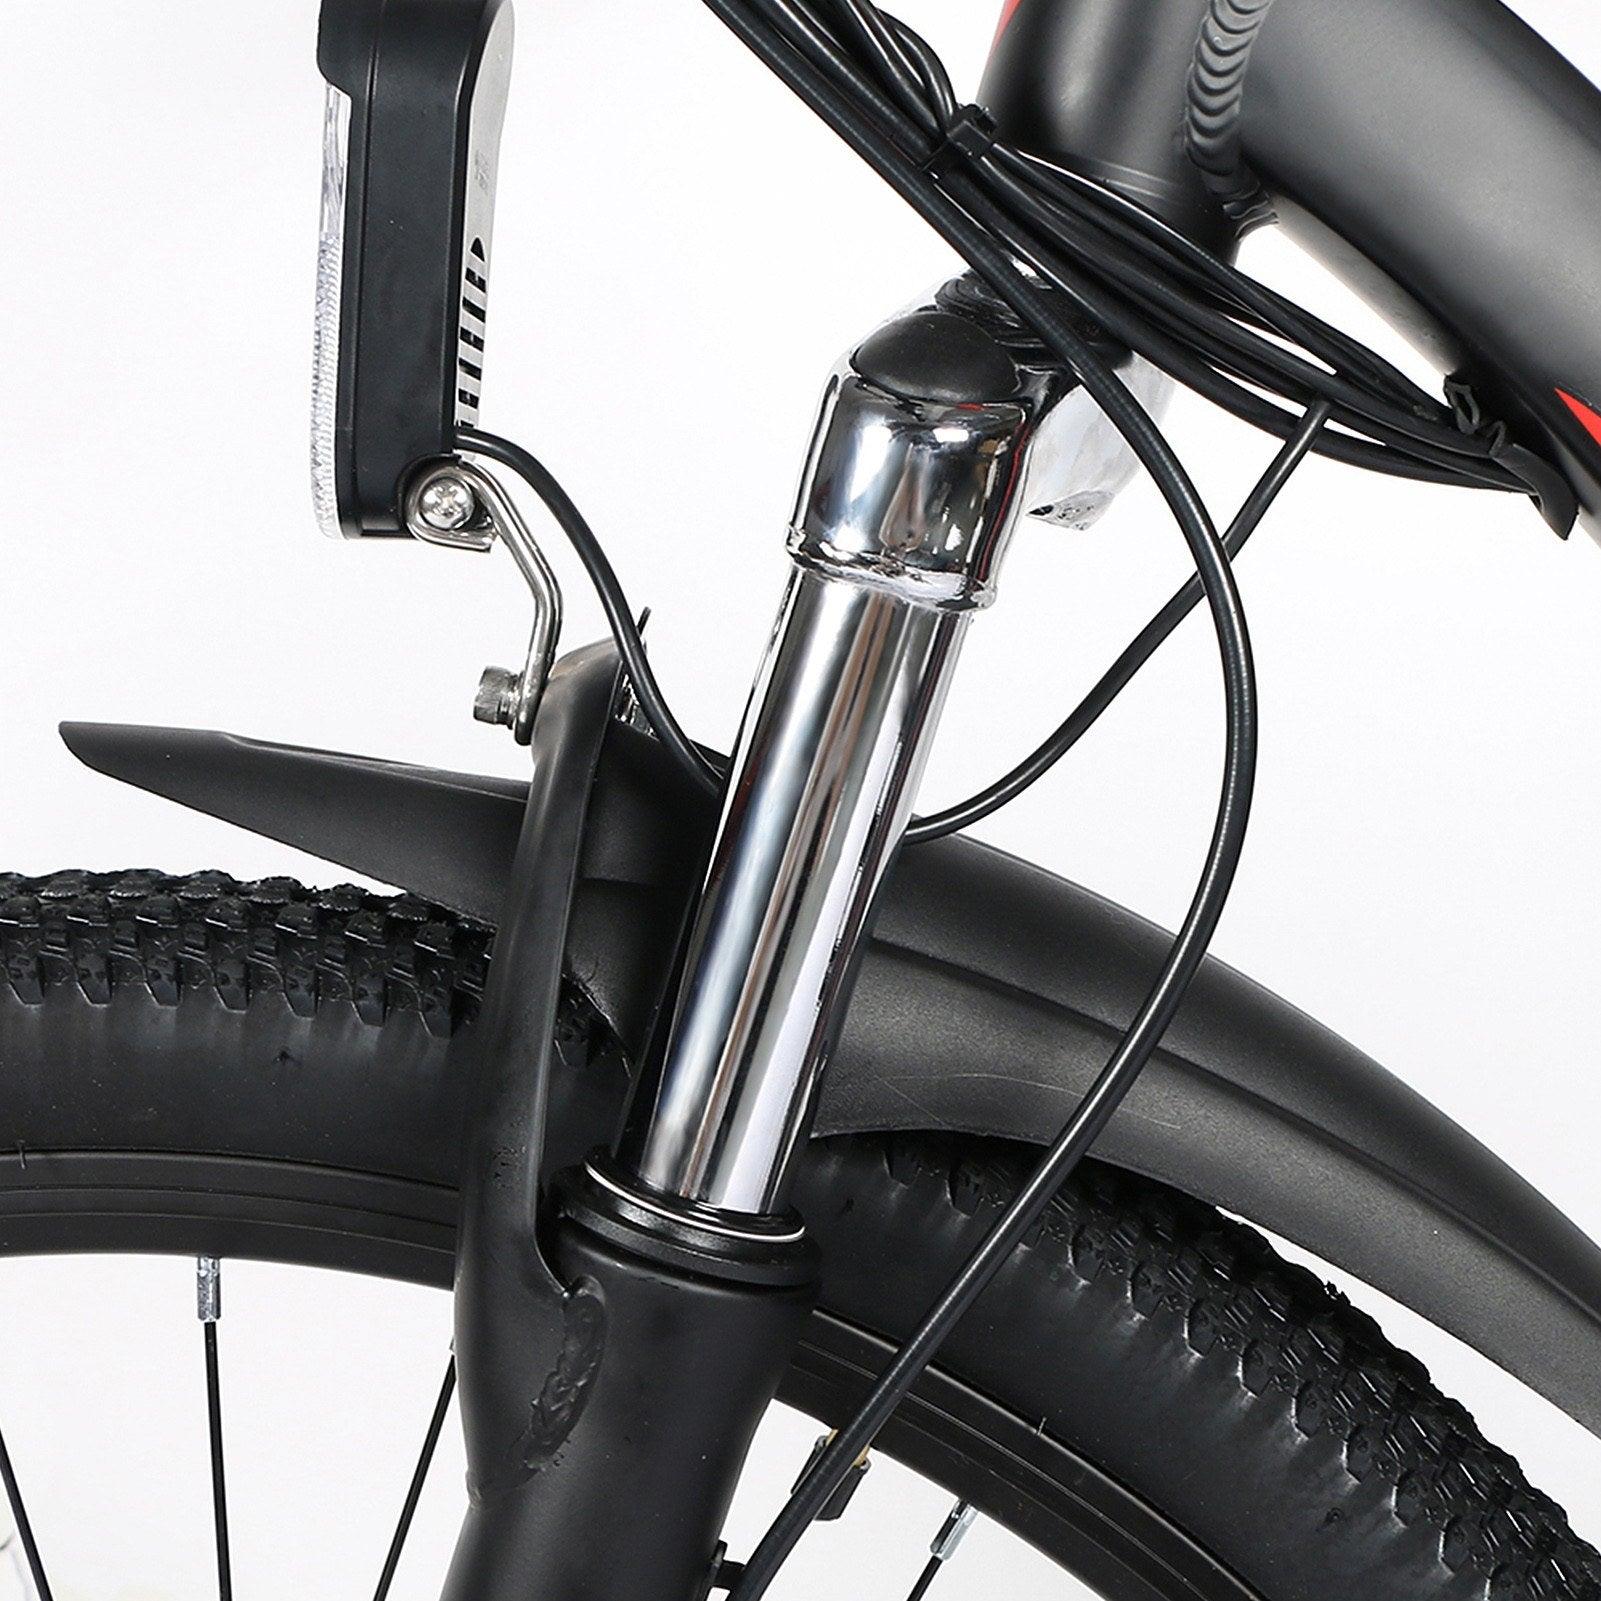 Samebike SY26 Electric Bike - Pogo Cycles available in cycle to work